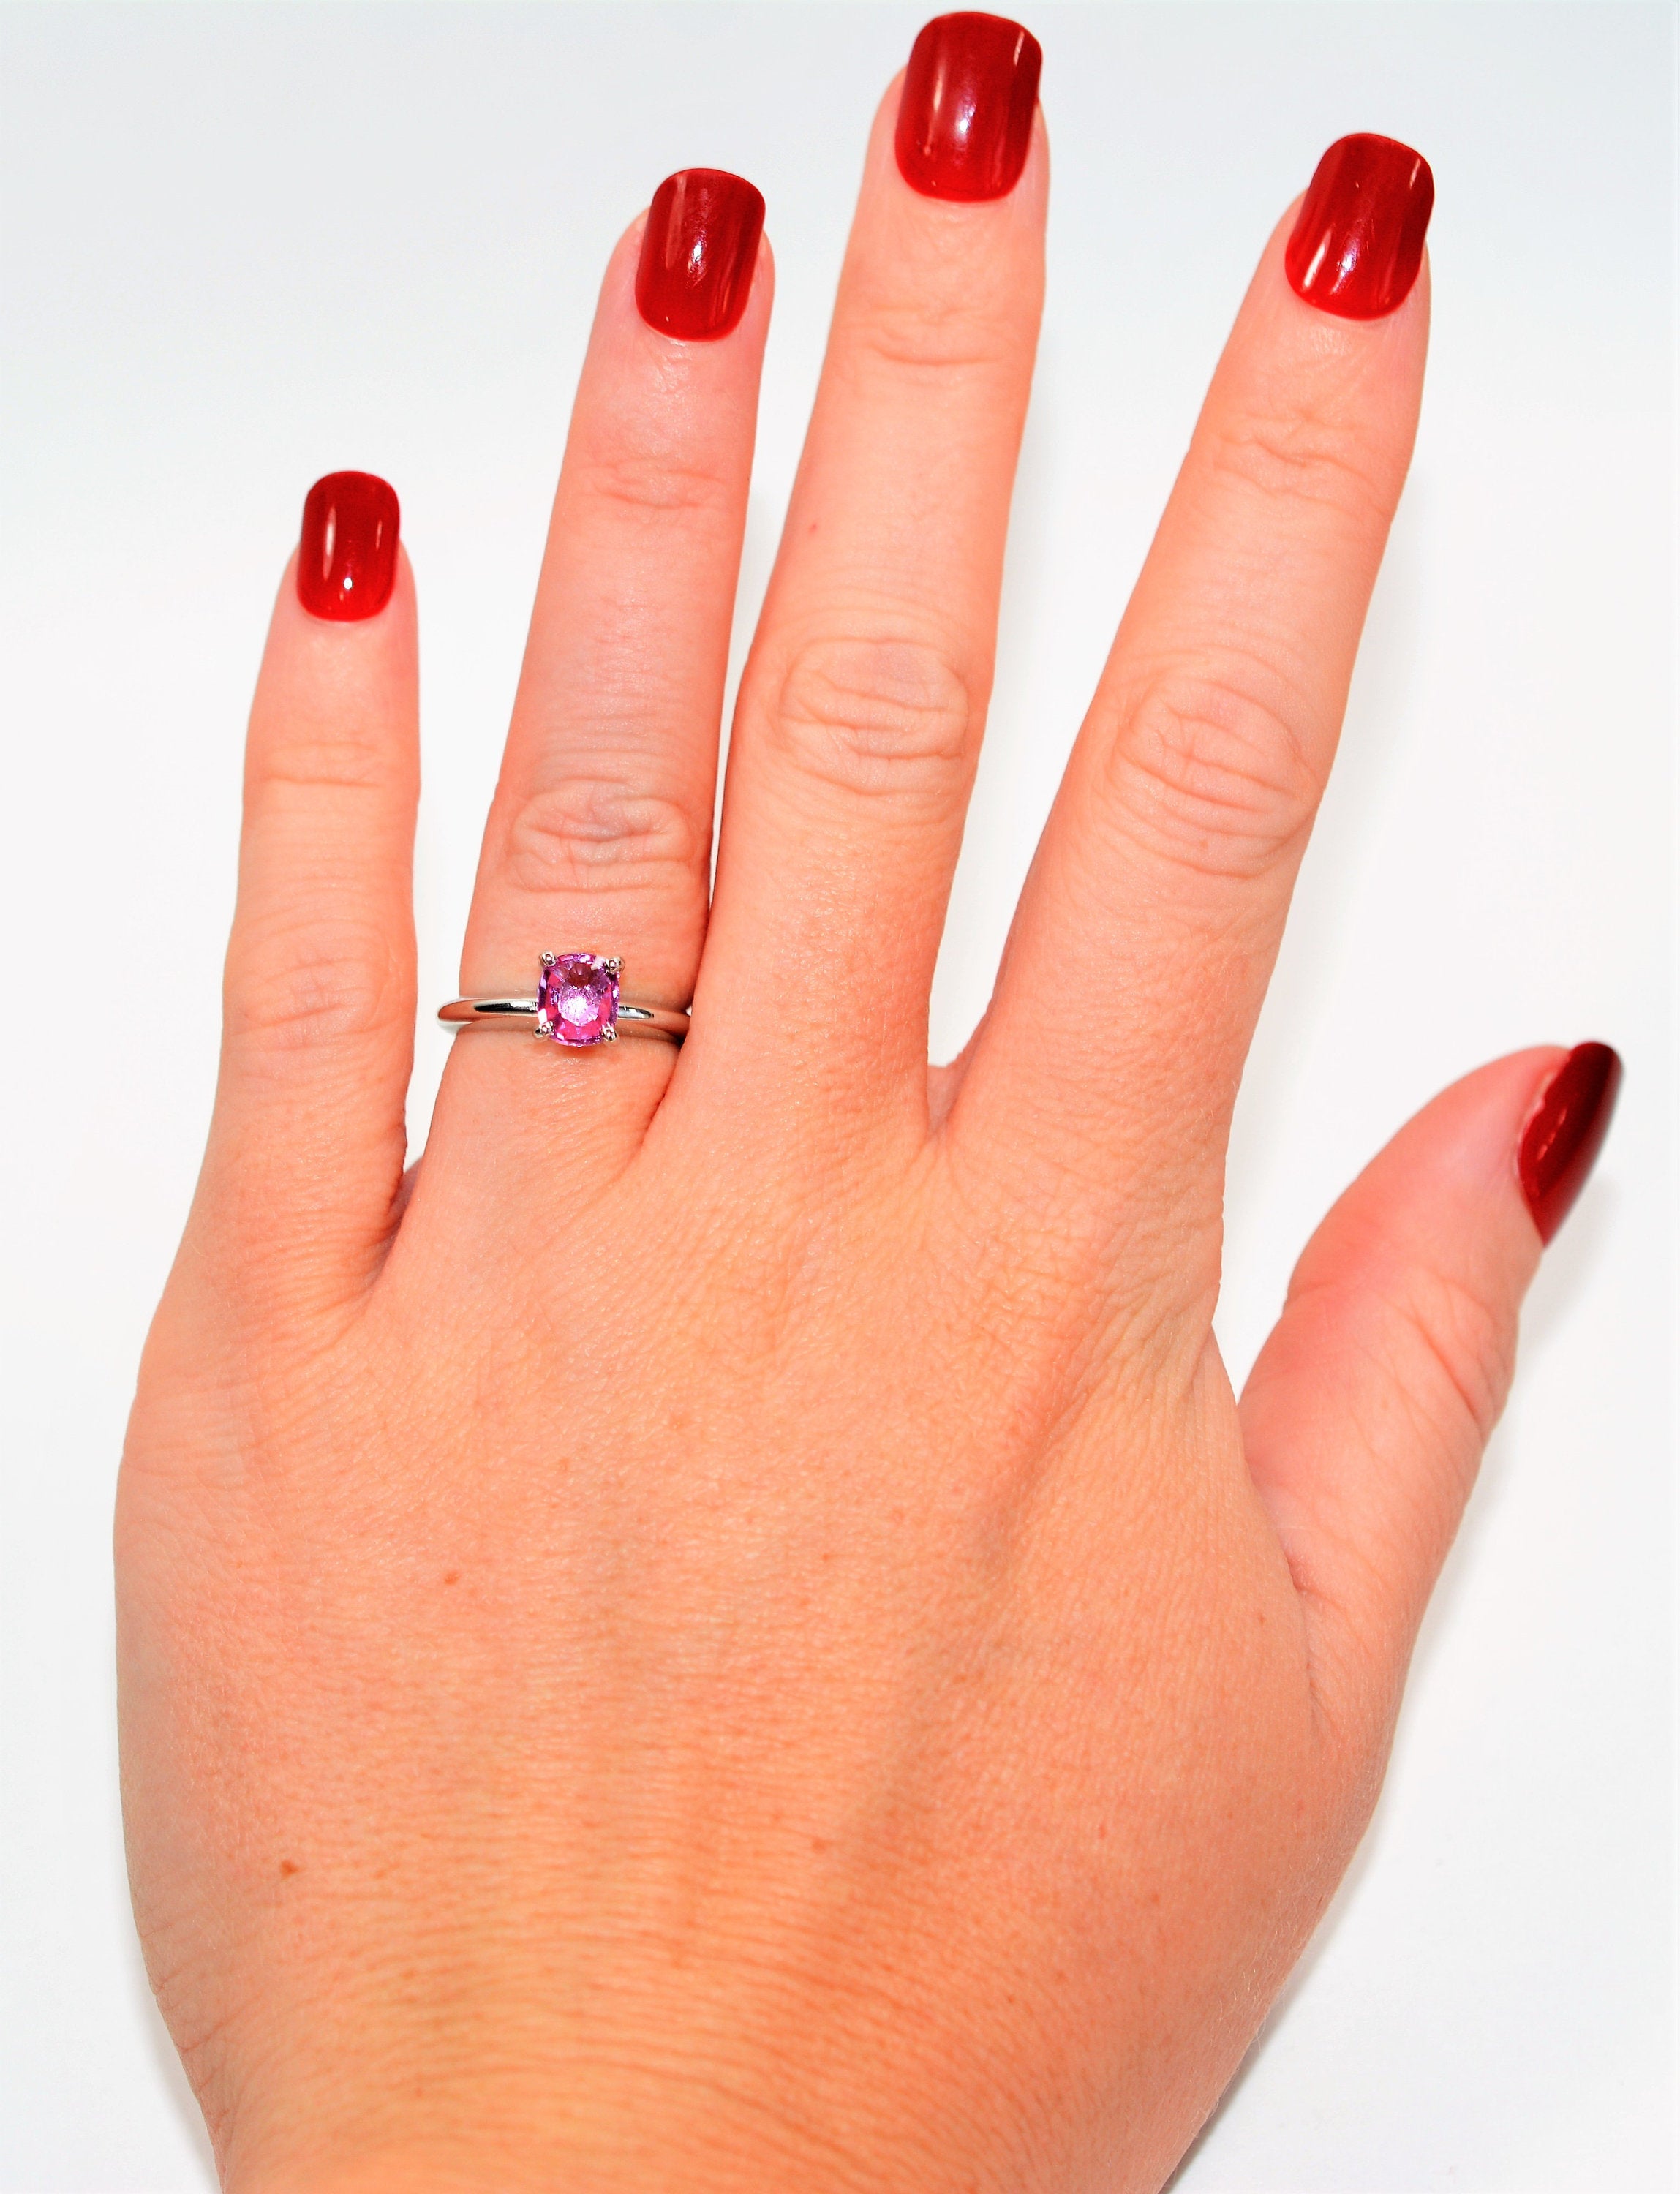 Natural Padparadscha Sapphire Ring Solid Platinum 1.05ct Ceylon Ring Sapphire Ring Solitaire Ring Engagement Ring Bridal Jewelry Pink Ring